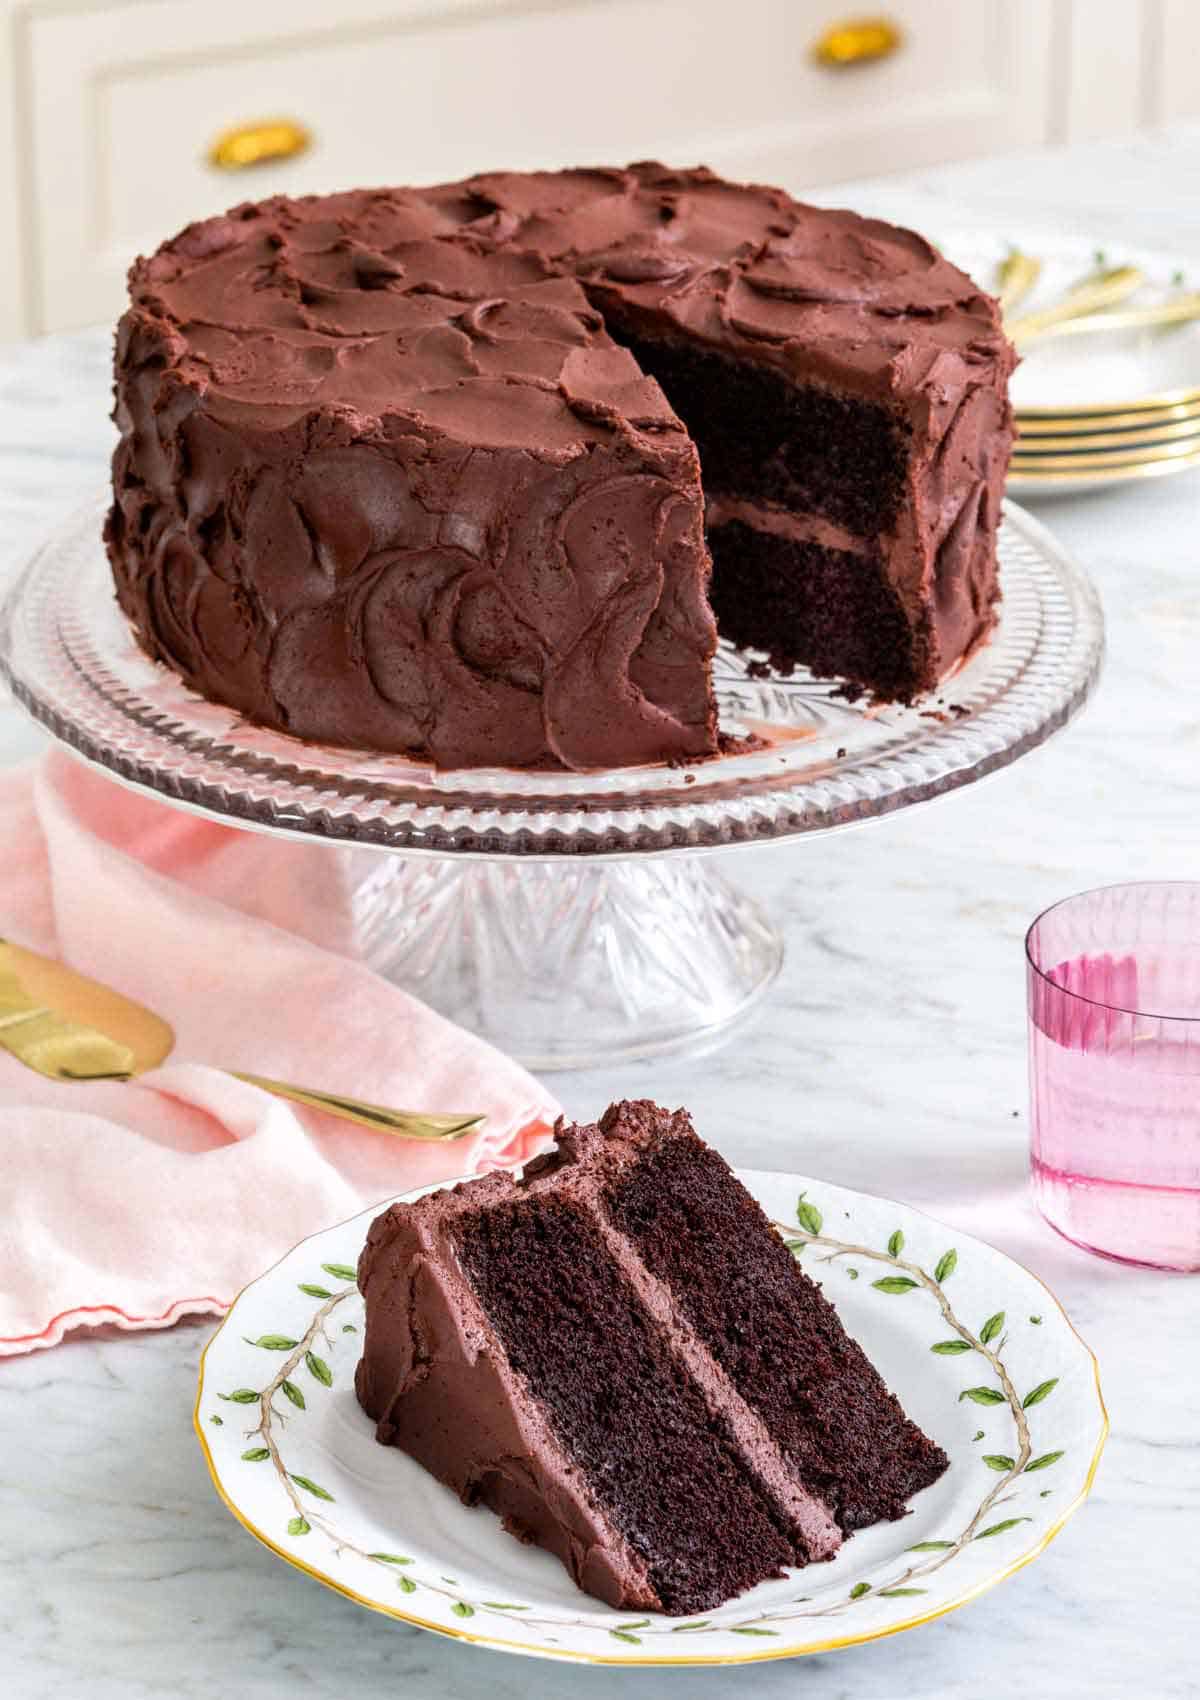 A cake stand with devil's food cake with a slice cut and served in front.